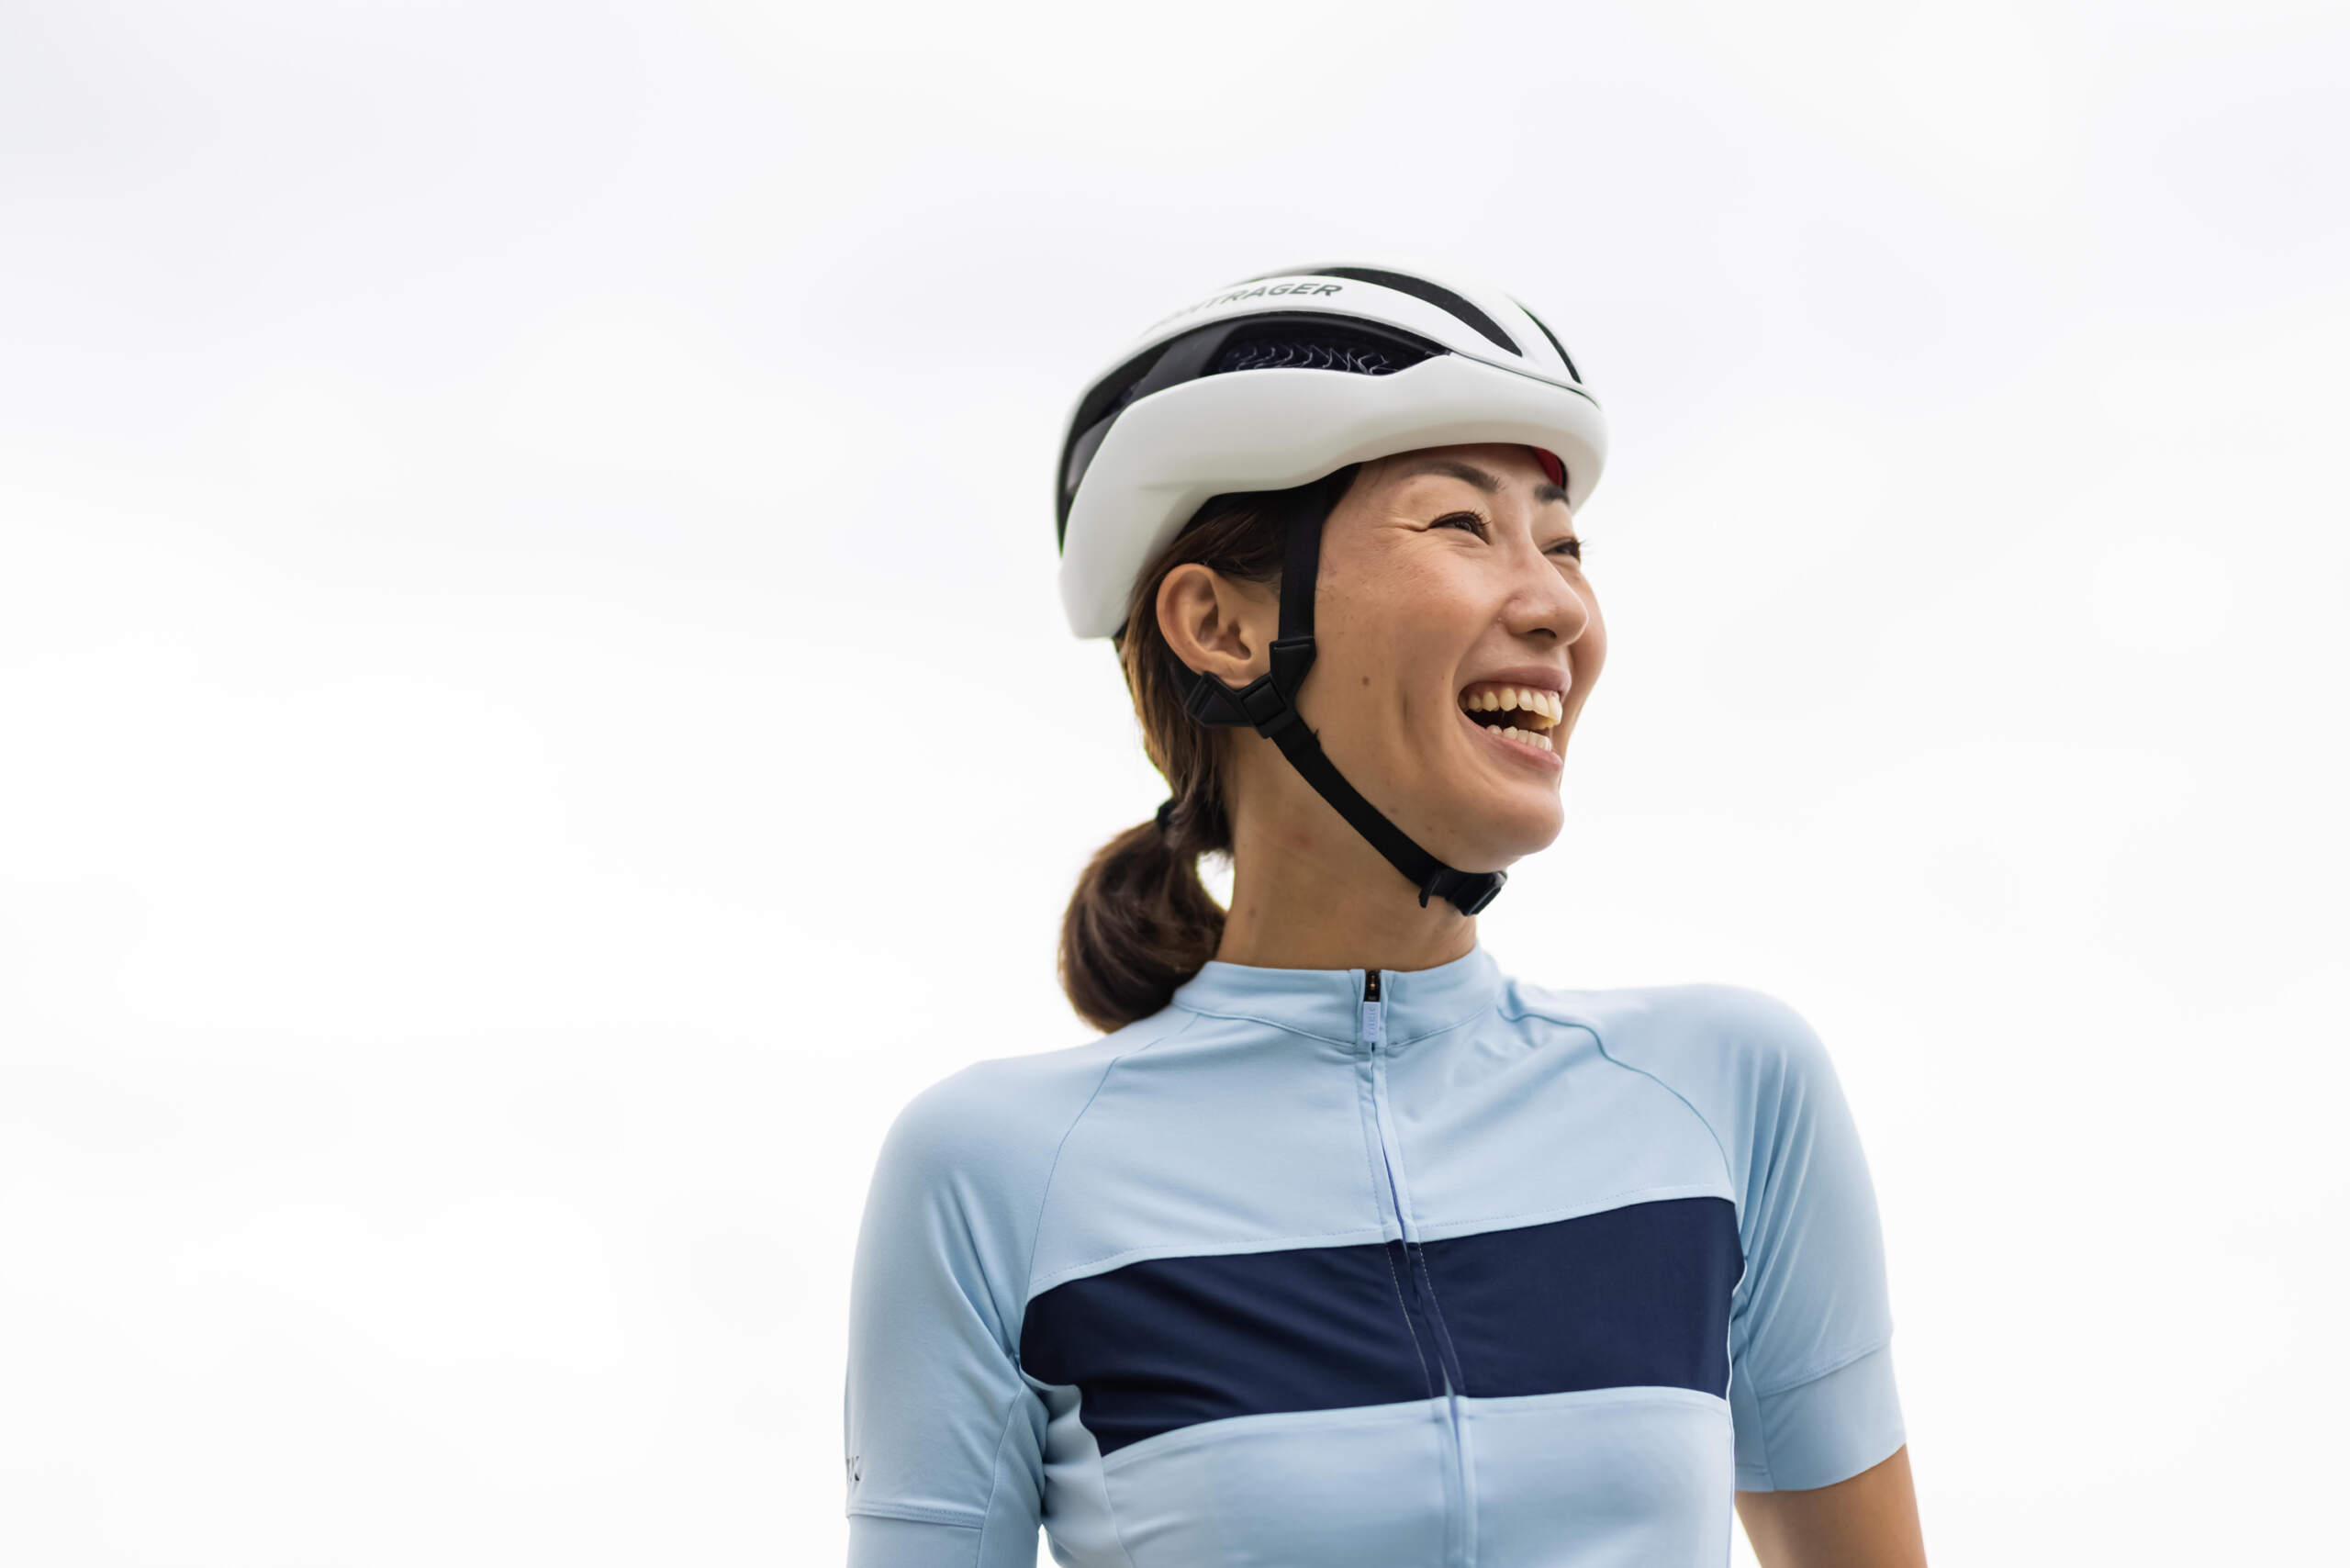 First Cycling Apparel Line that Contains More Sustainably Sourced Materials